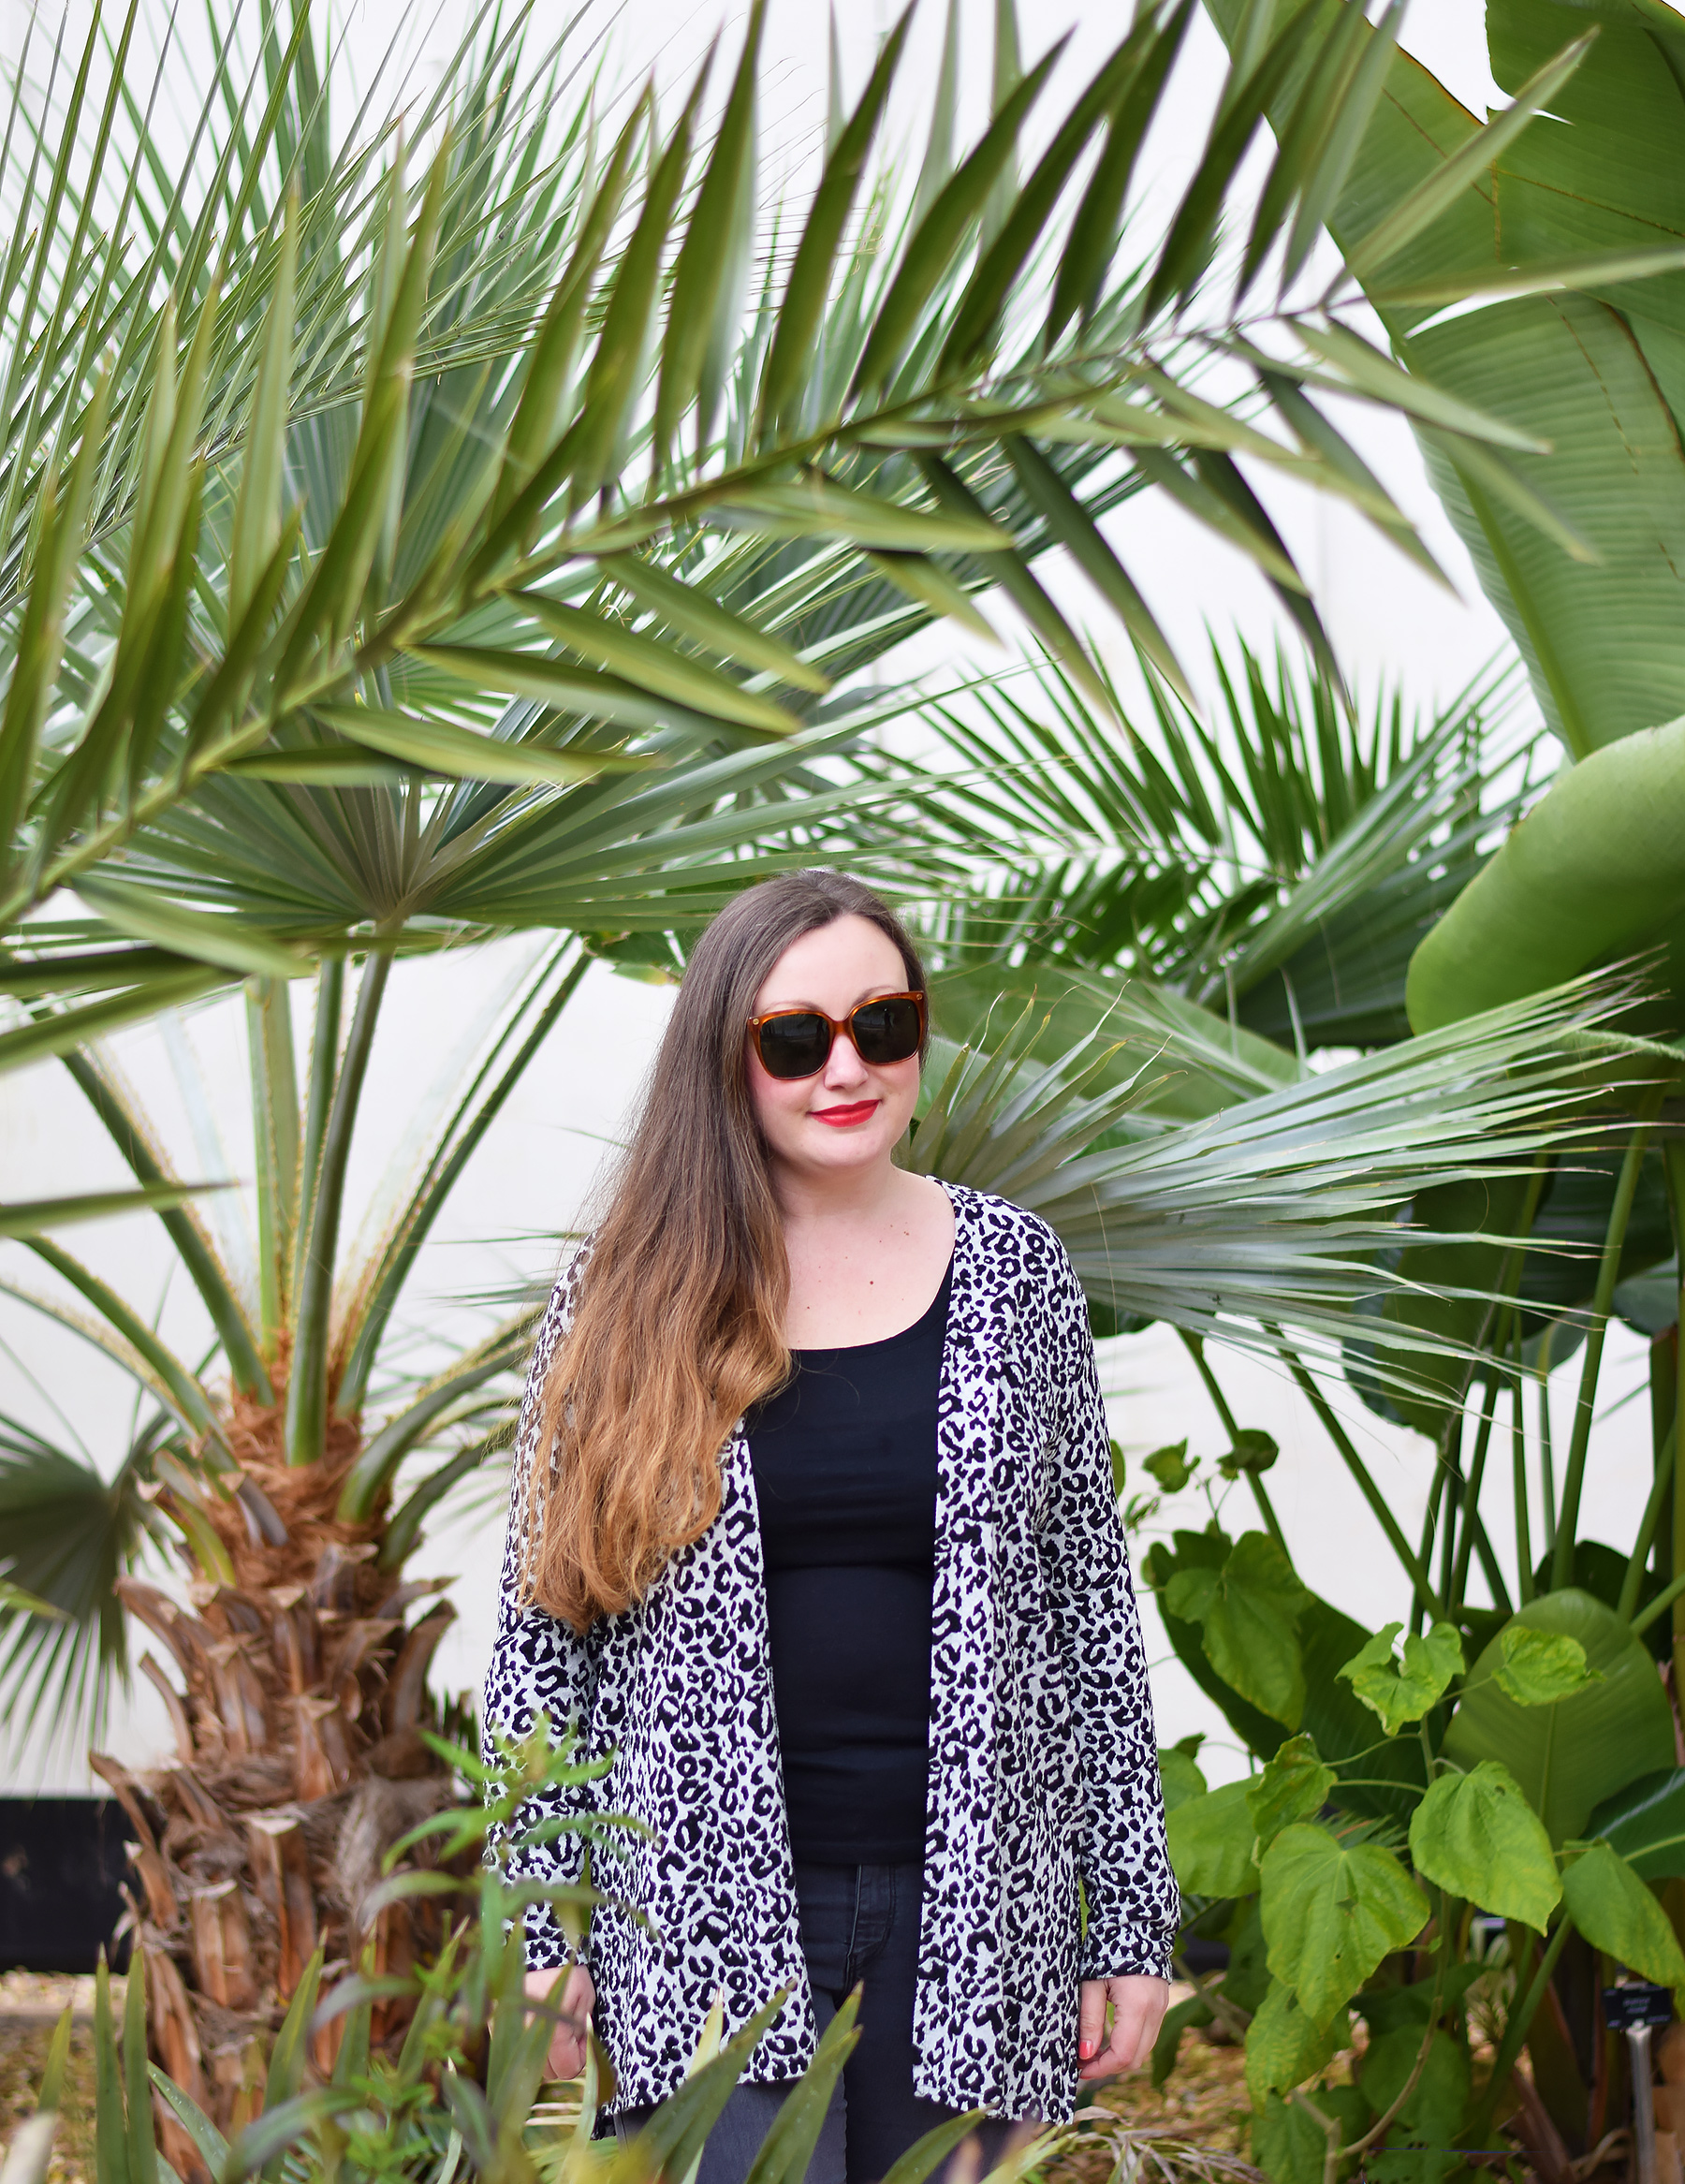 Gemma from Jacquard Flower Blog wearing leopard print in the Palm House botanical gardens